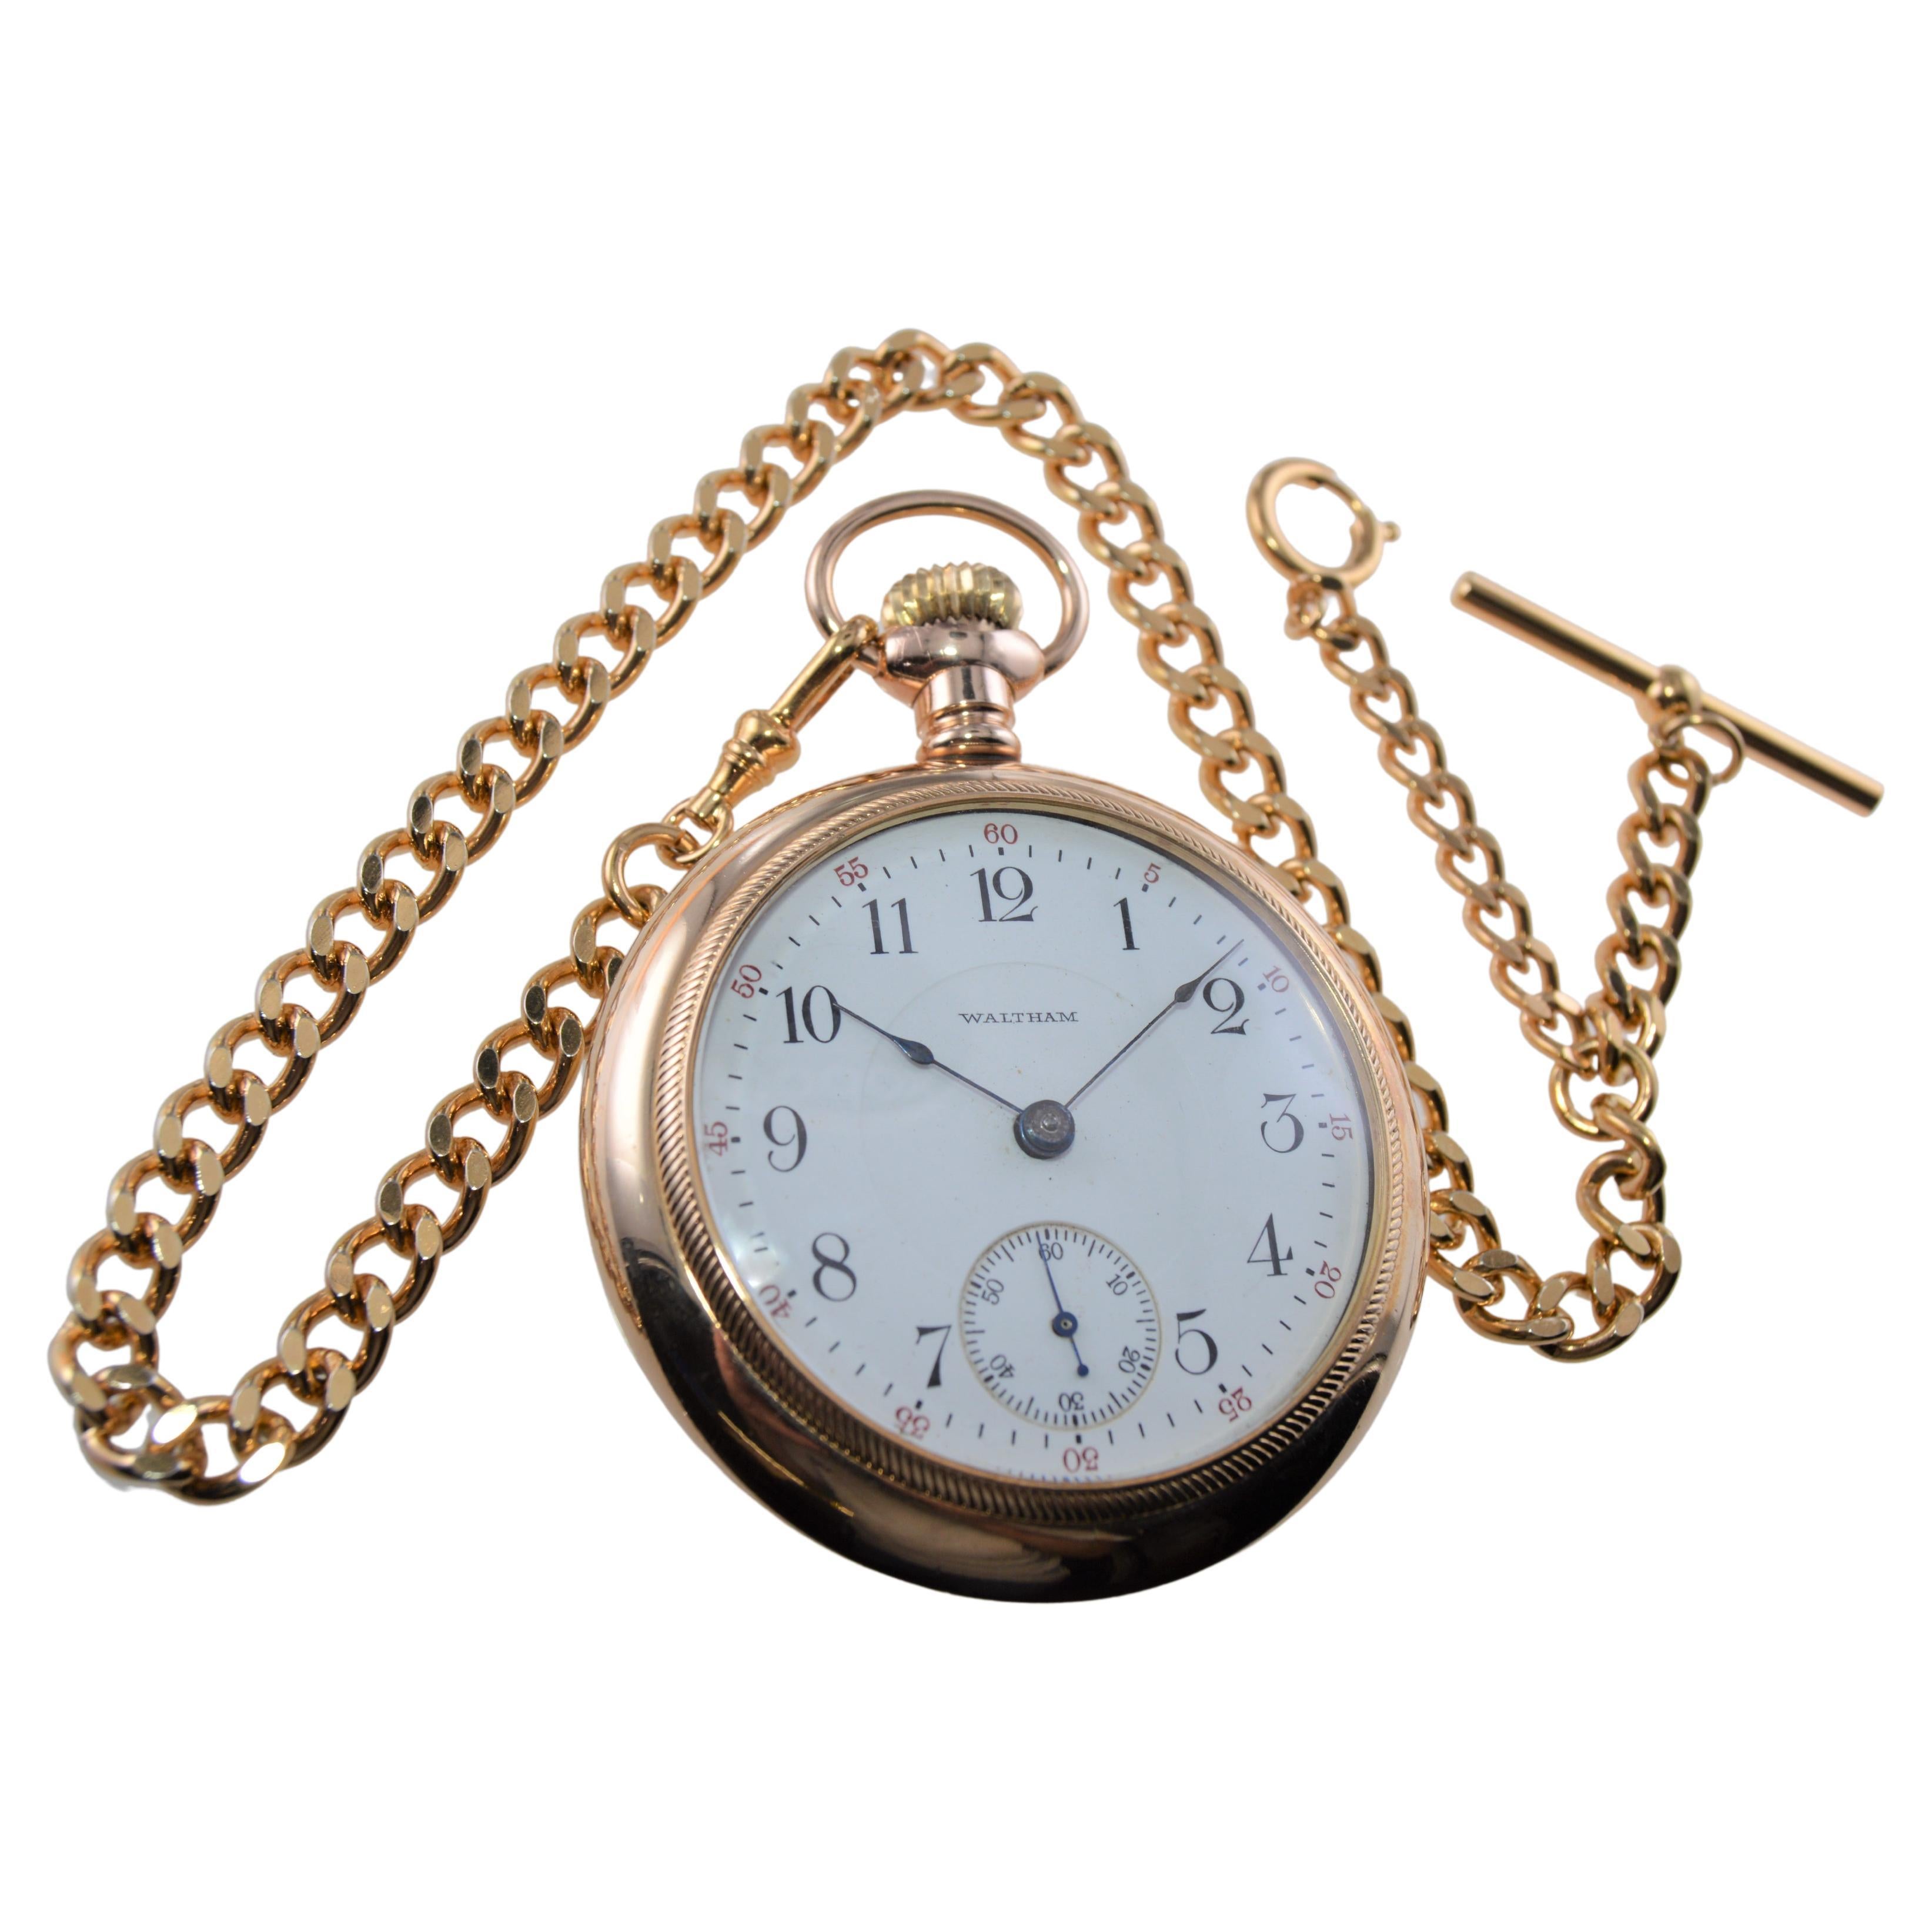 Waltham Open Faced American Pocket Watch with Period Watch Chain from 1934 For Sale